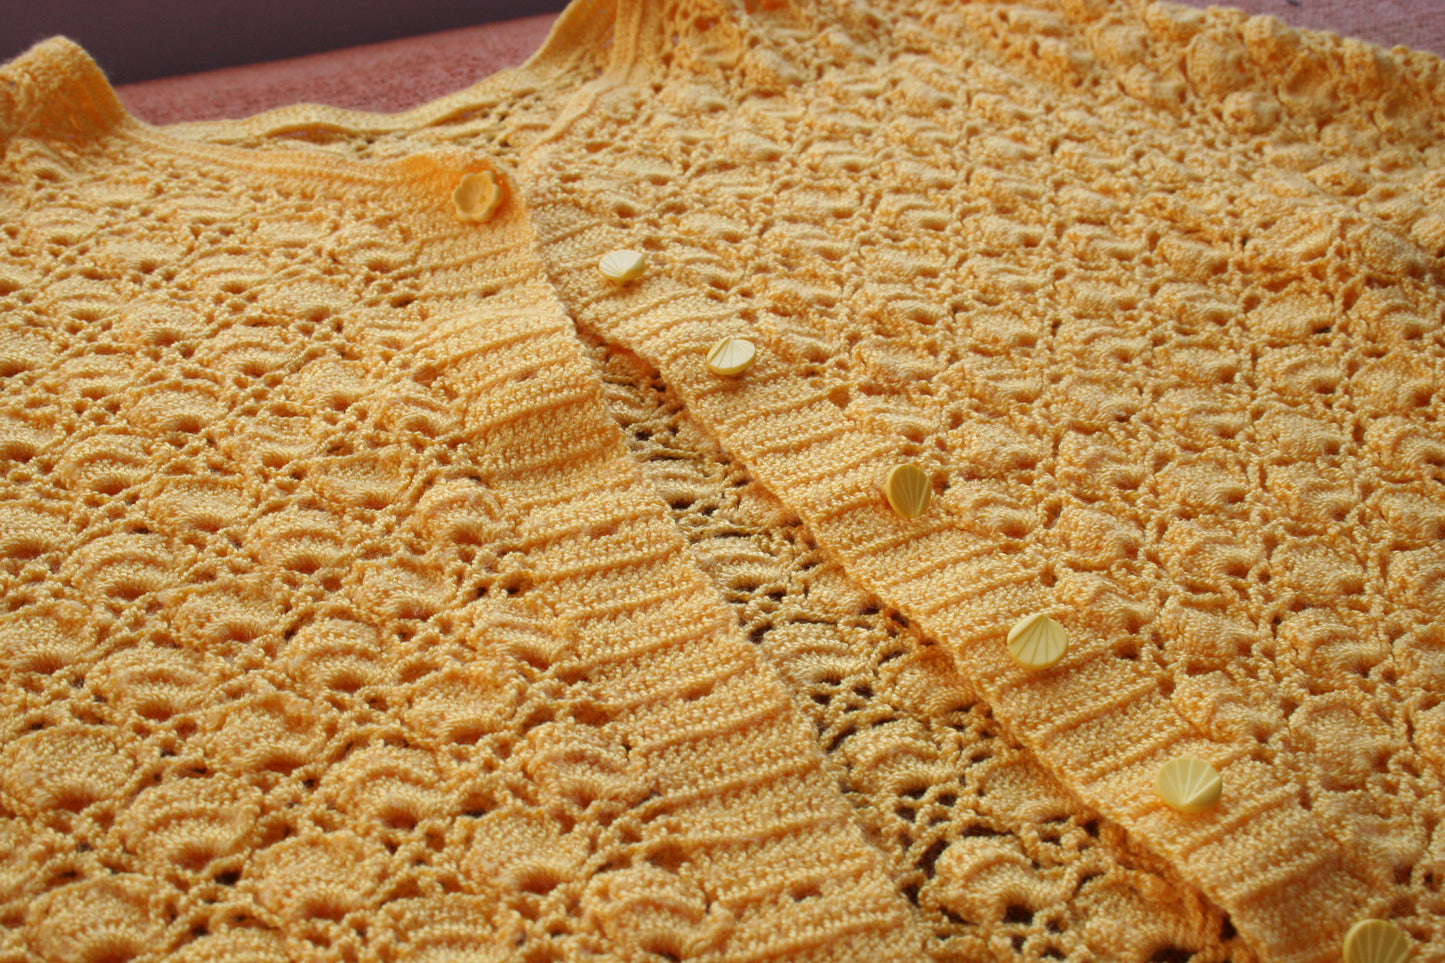 Detail of the crochet stitch pattern and buttons